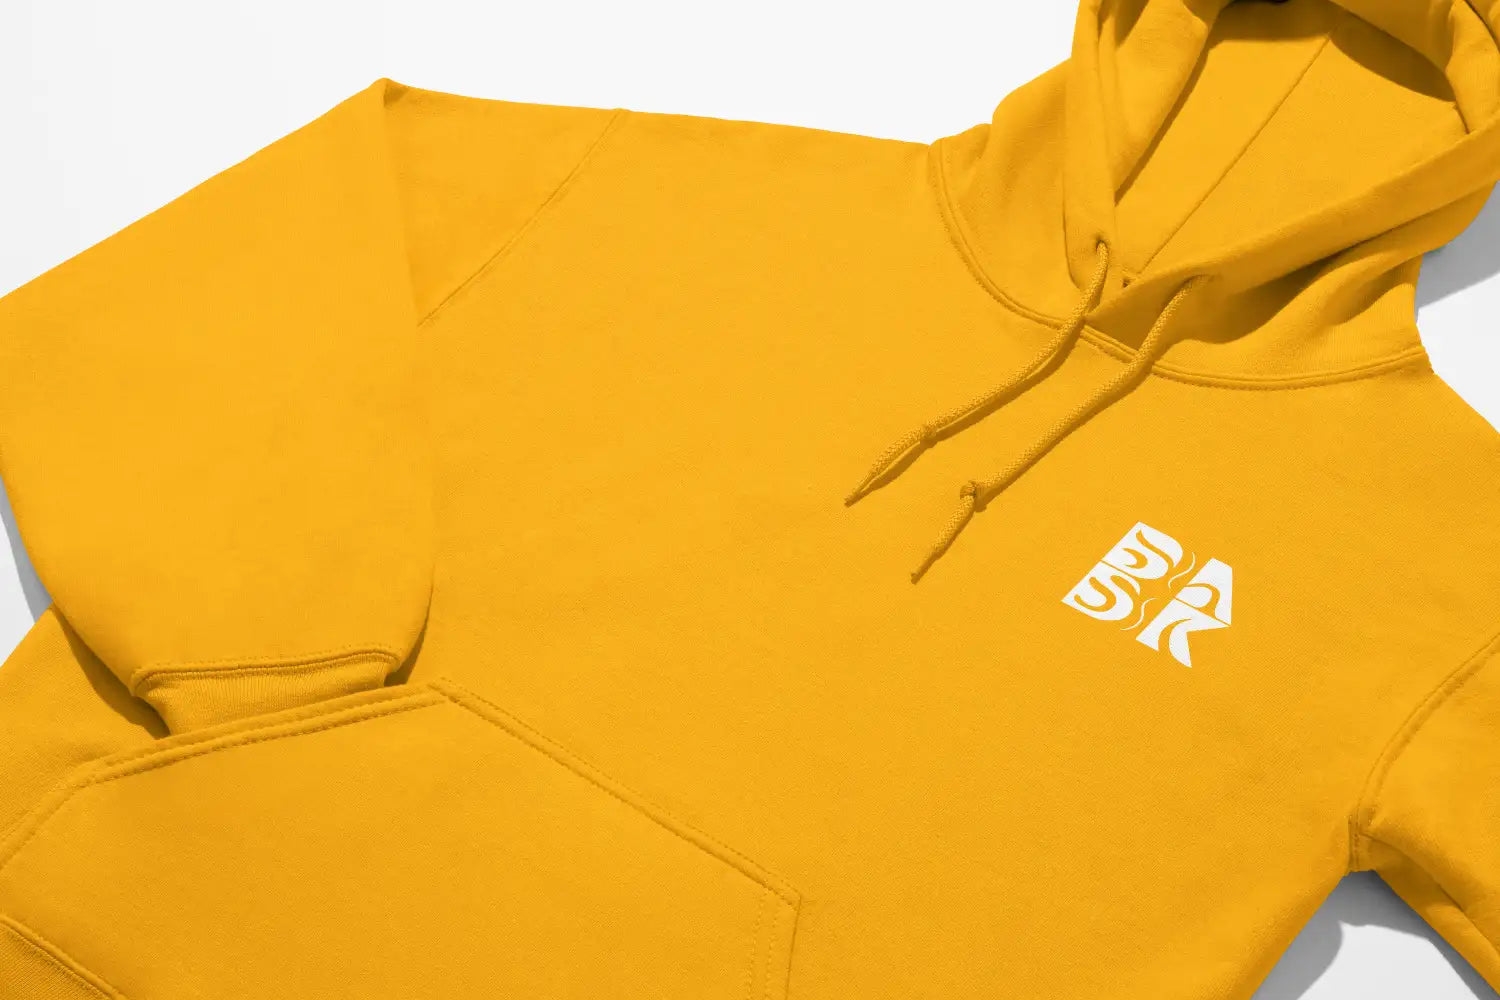 A warm Sunkissed & Saved Hoodie by Be Still and Know with a white logo on it.